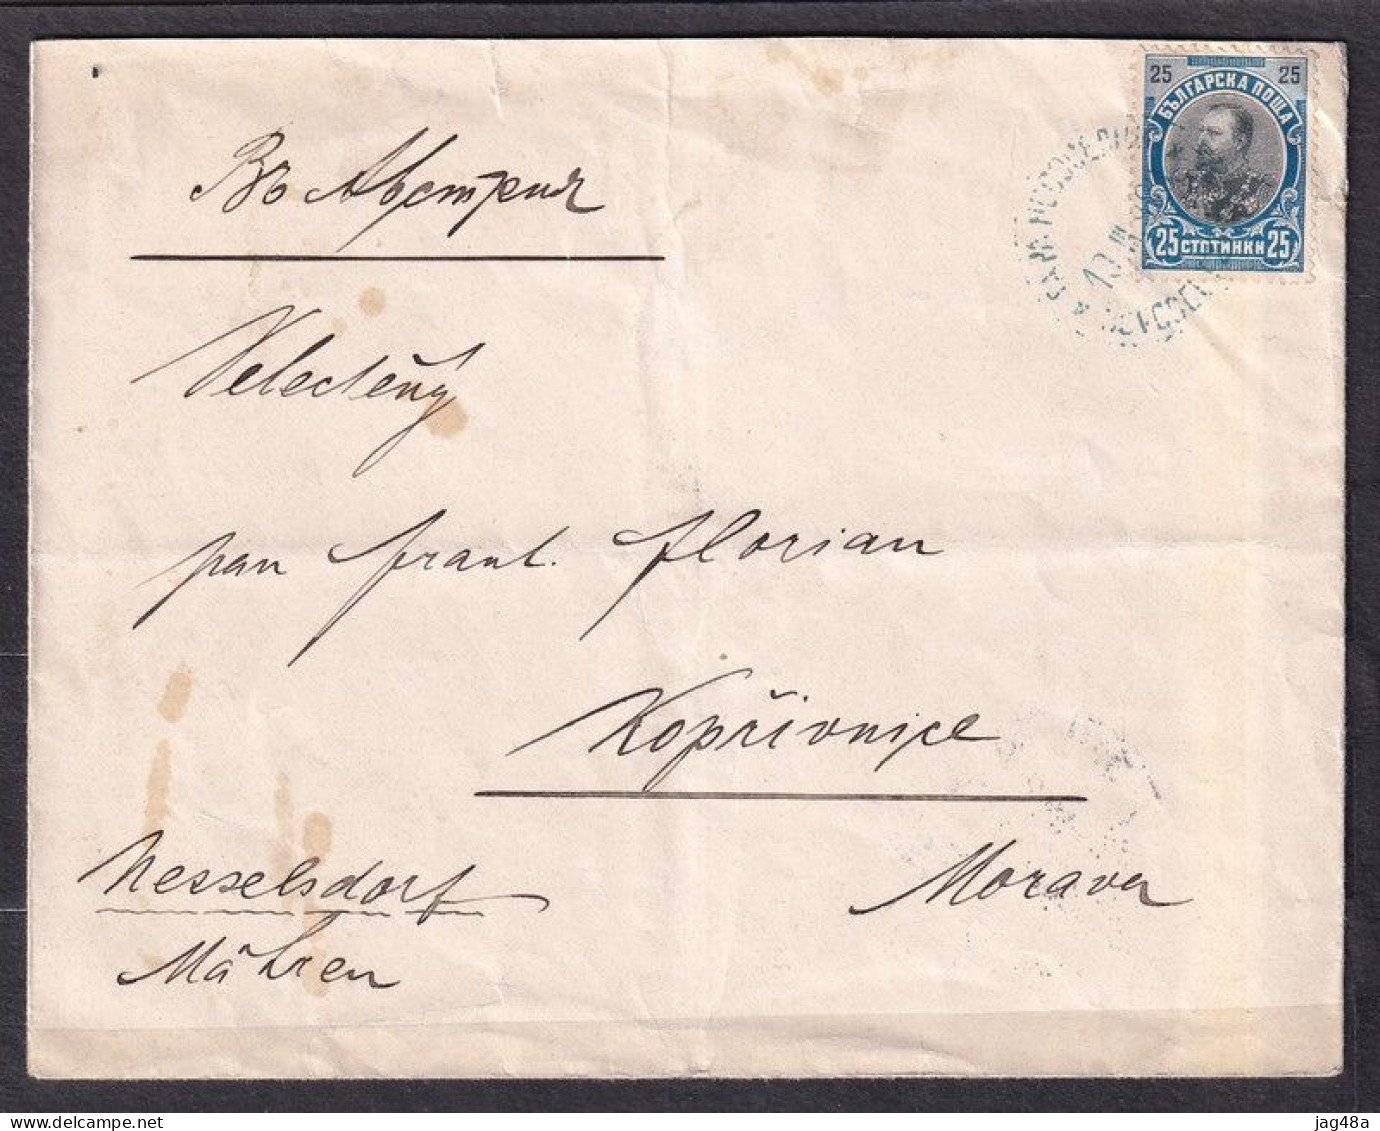 BULGARIA. 1903/Sofia, Single Franking Envelope/abroad Mail. - Covers & Documents